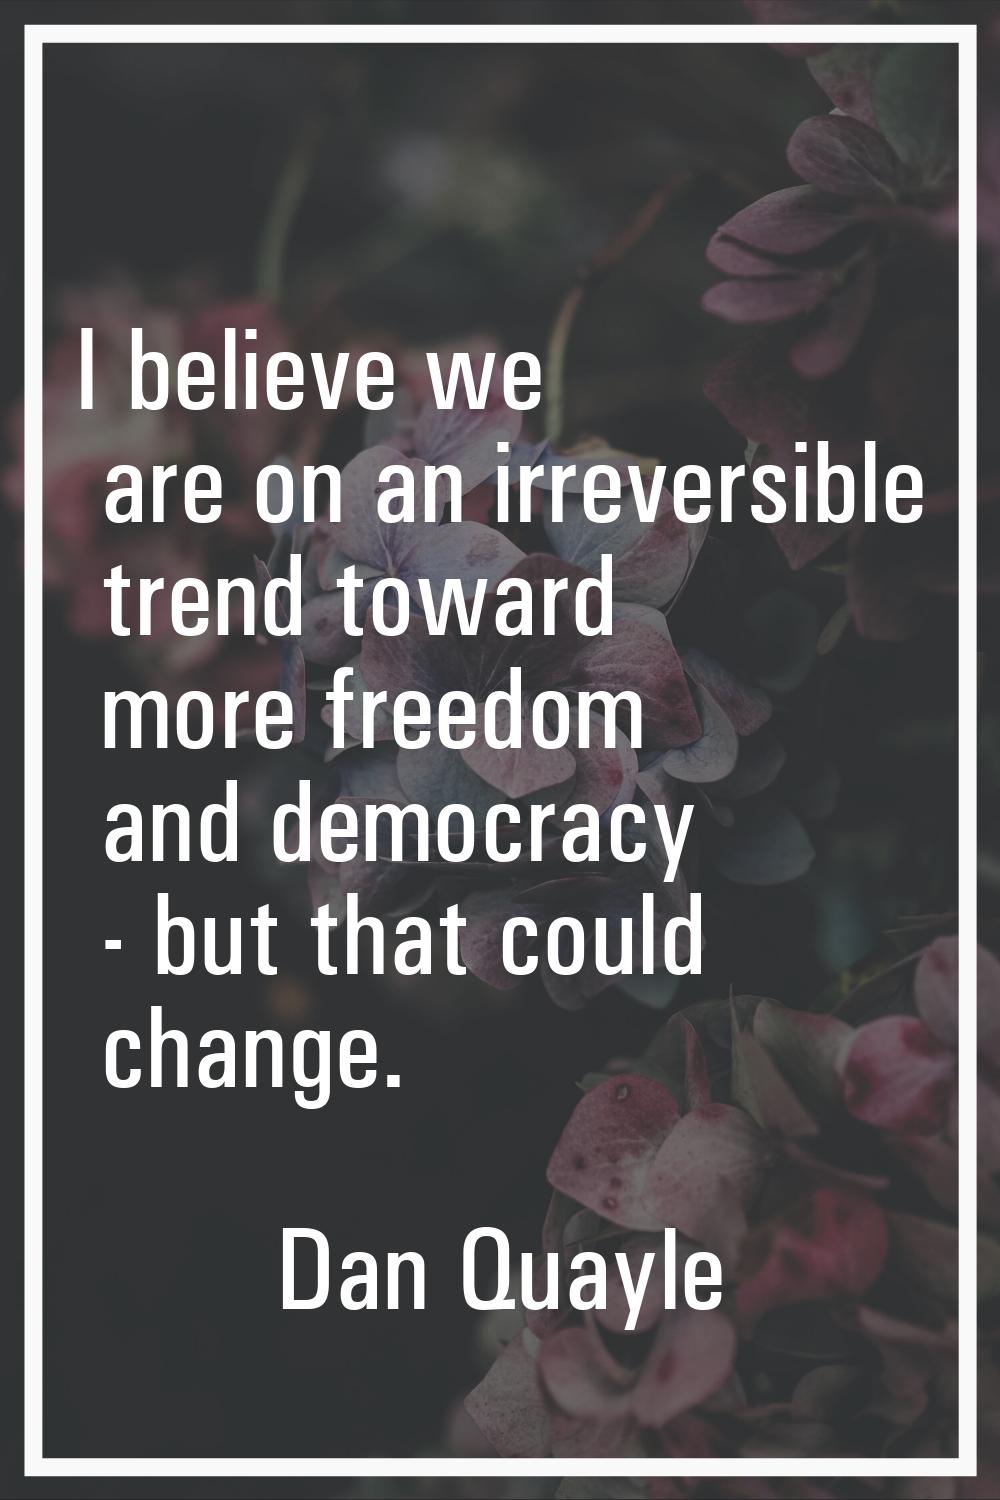 I believe we are on an irreversible trend toward more freedom and democracy - but that could change